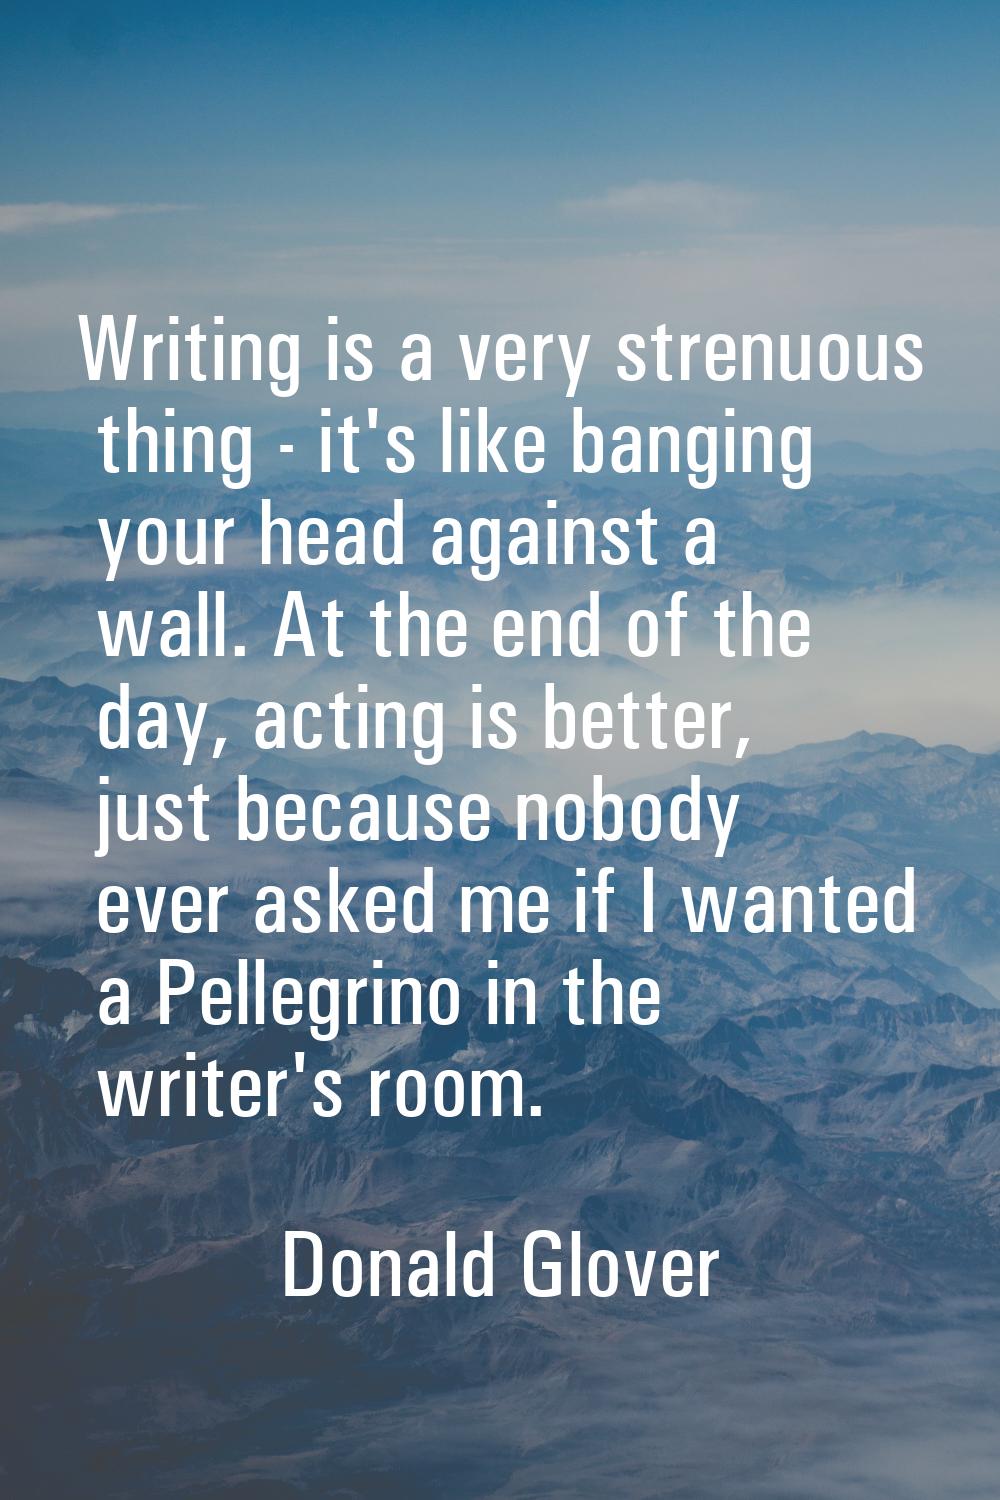 Writing is a very strenuous thing - it's like banging your head against a wall. At the end of the d